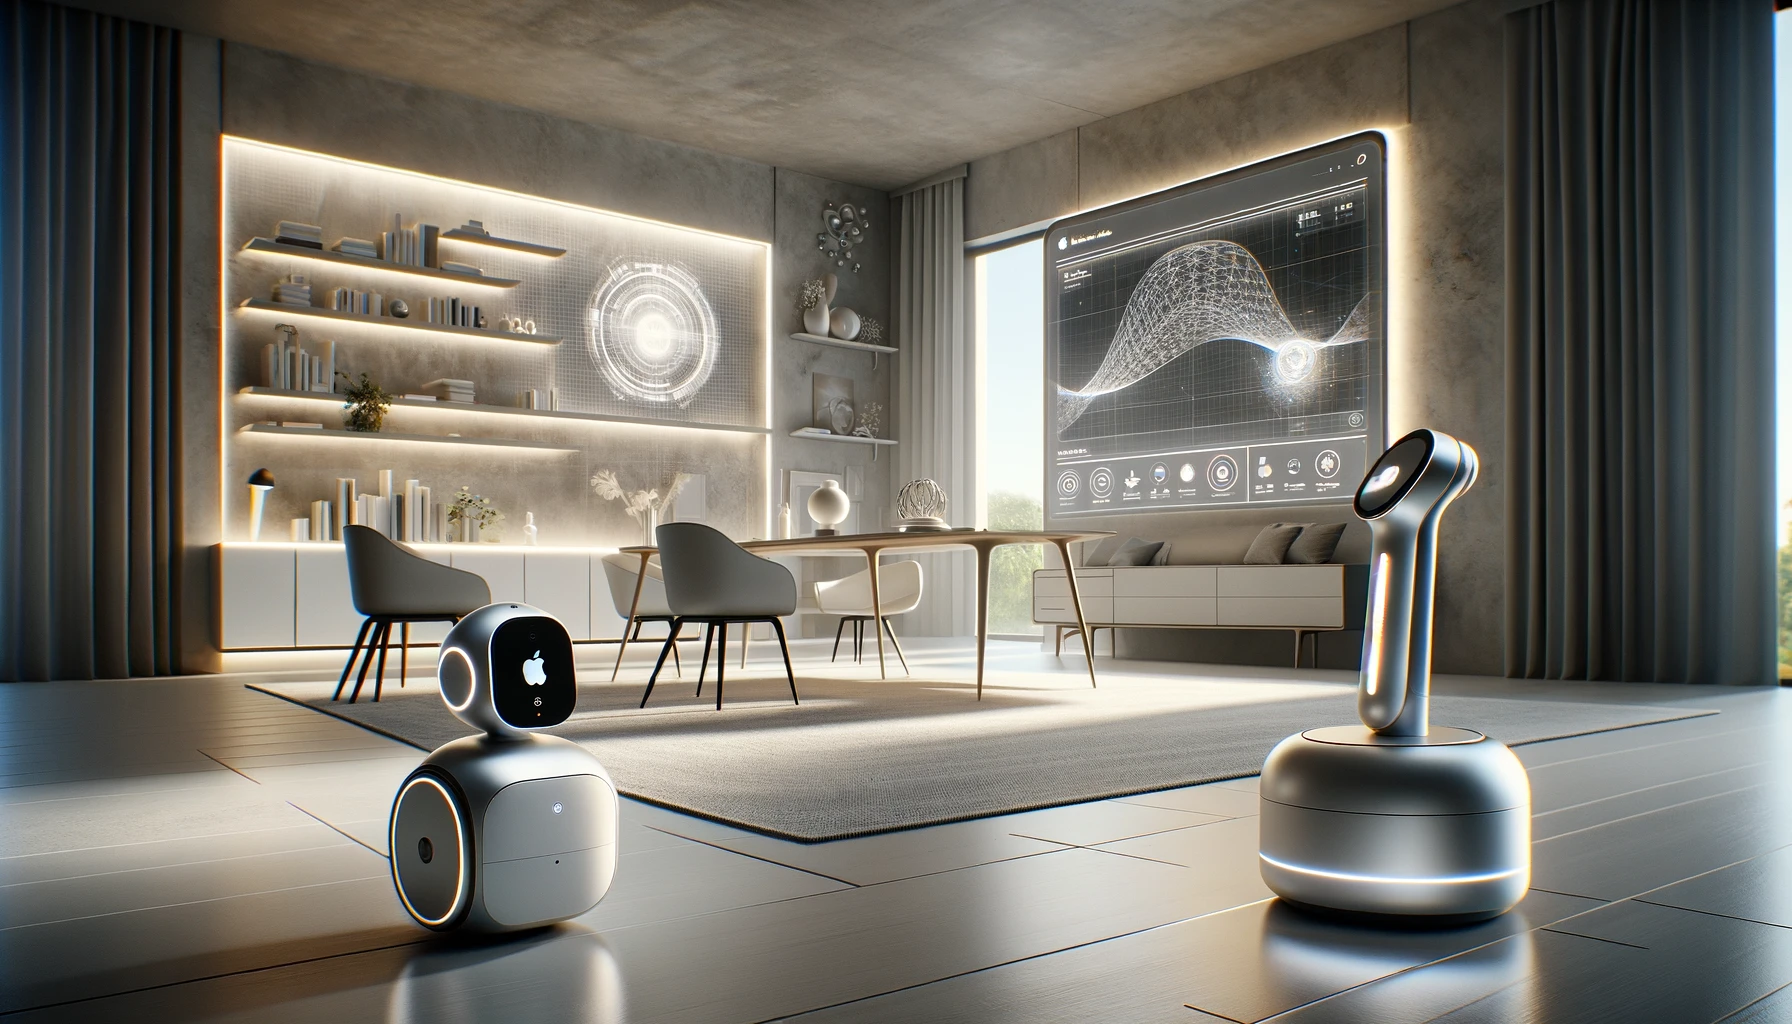 Apple explores frontier of personal robotics with innovative home devices